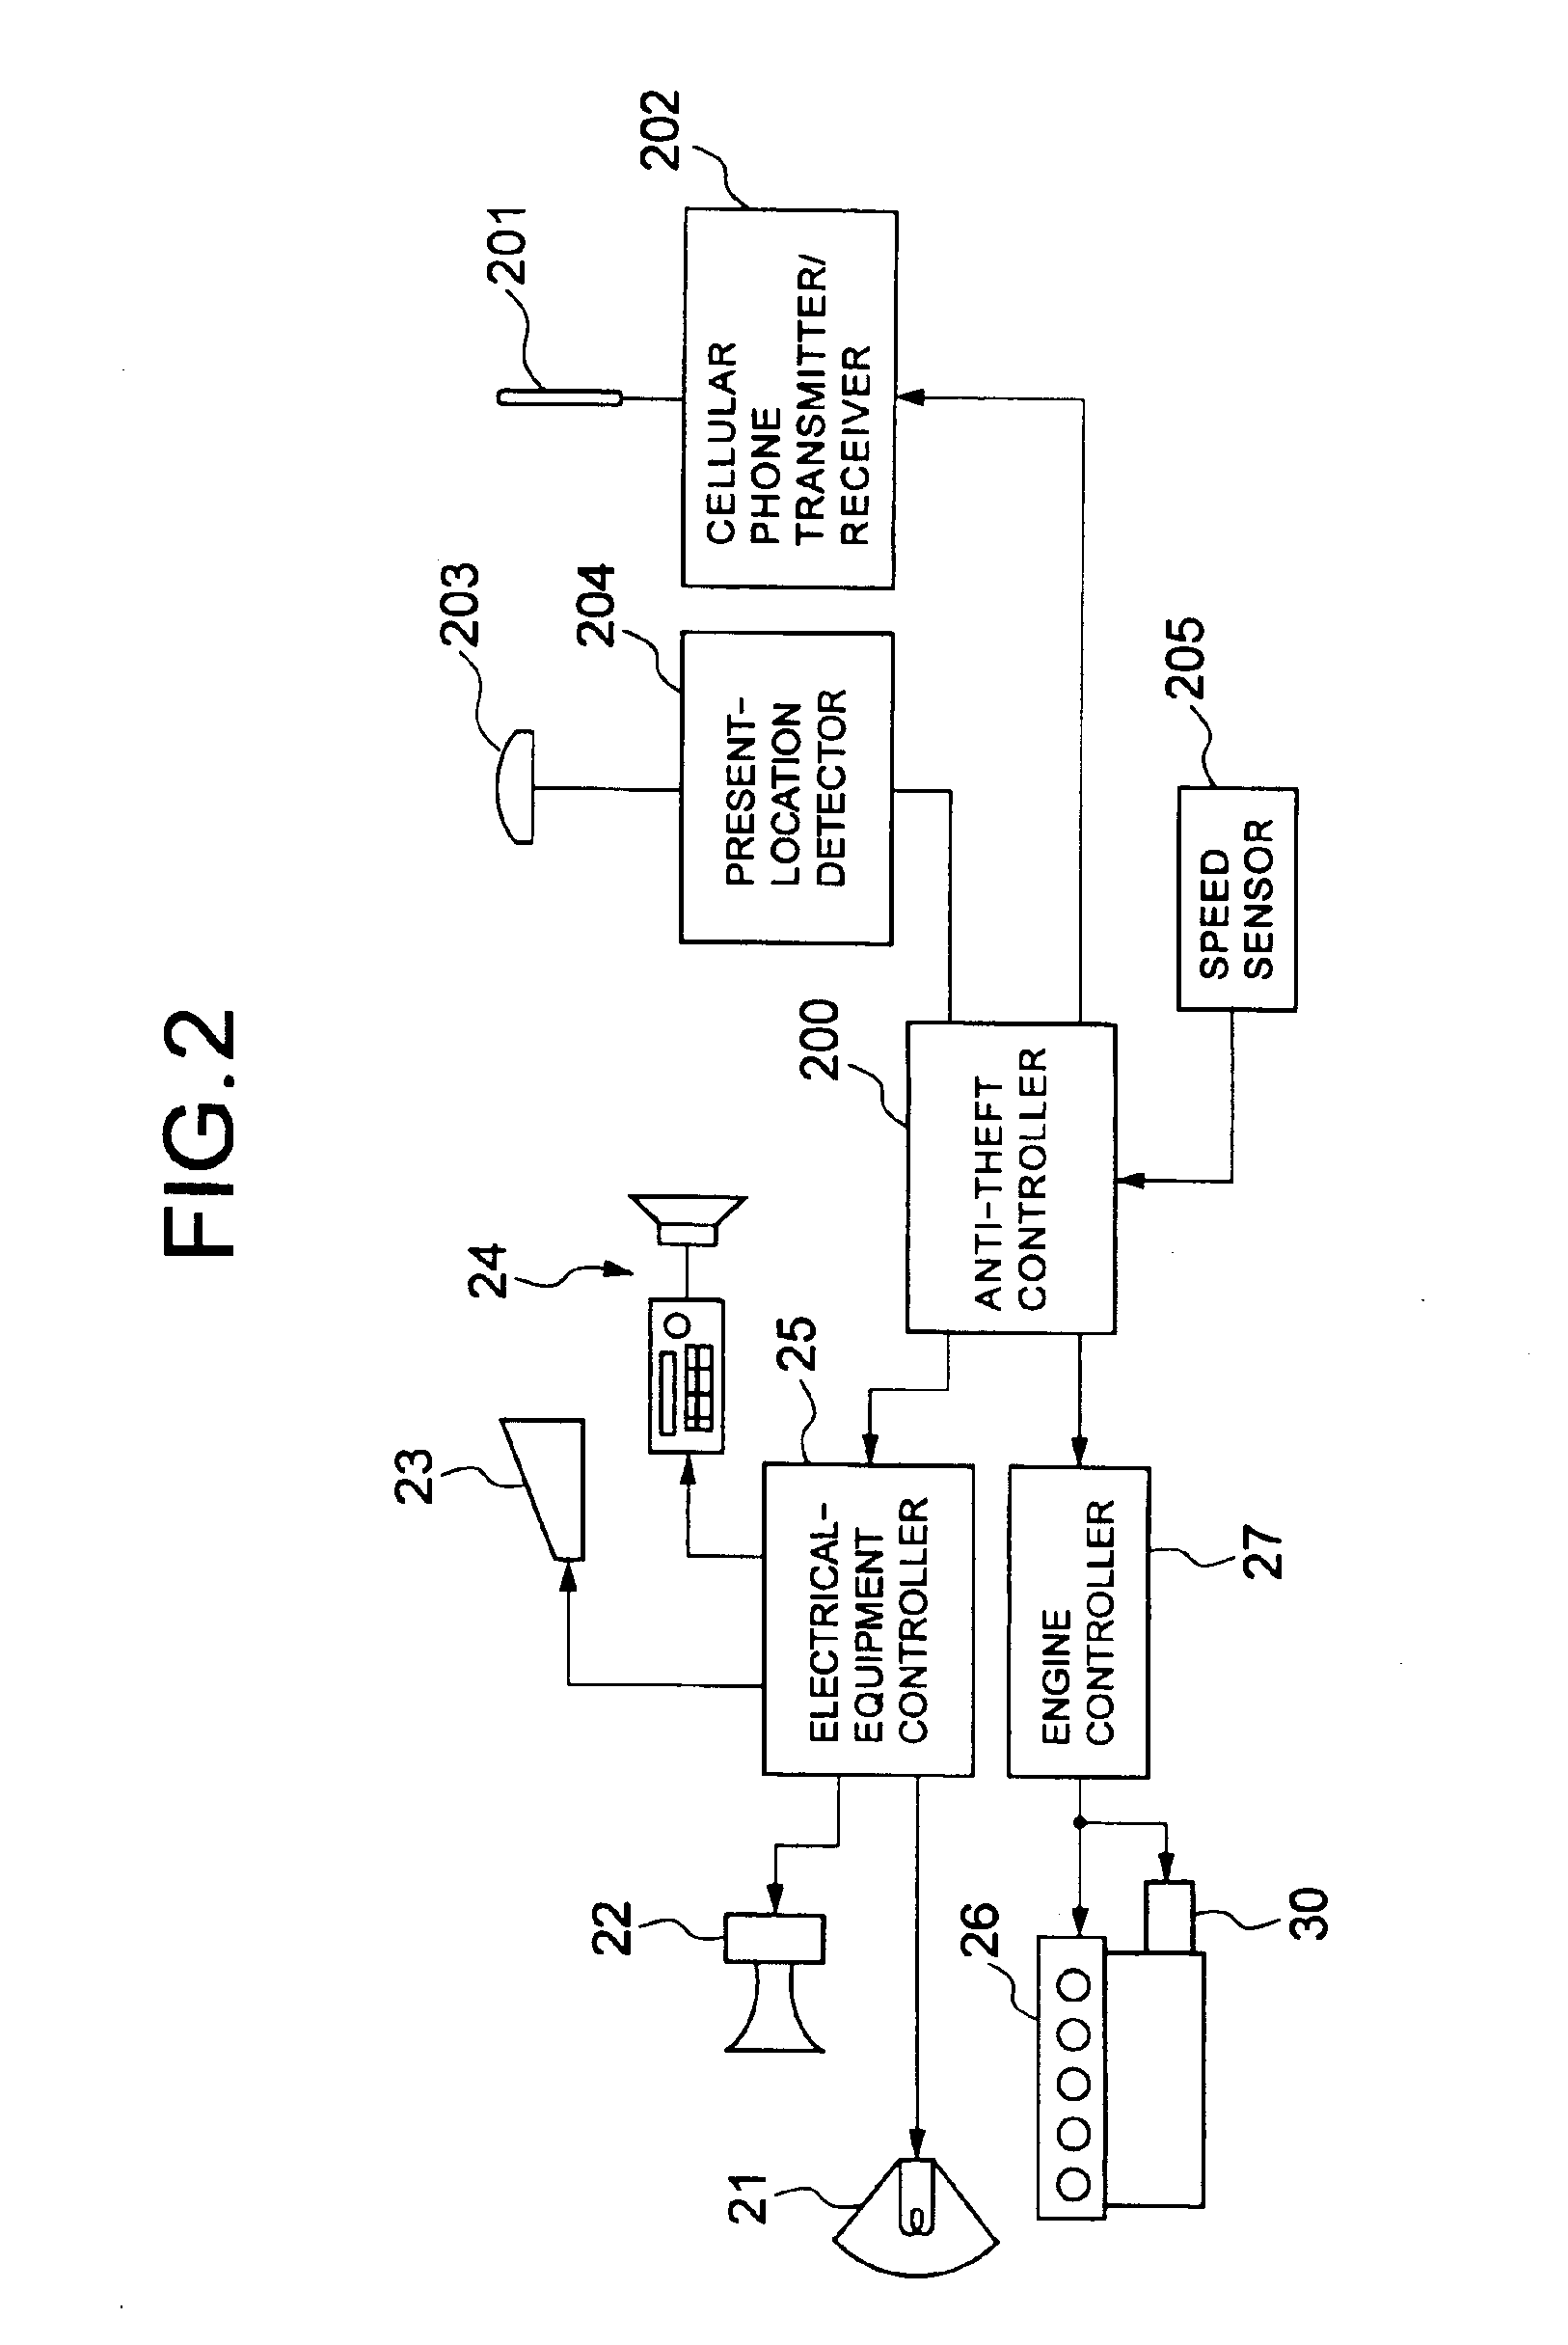 Anti-theft system for vehicles